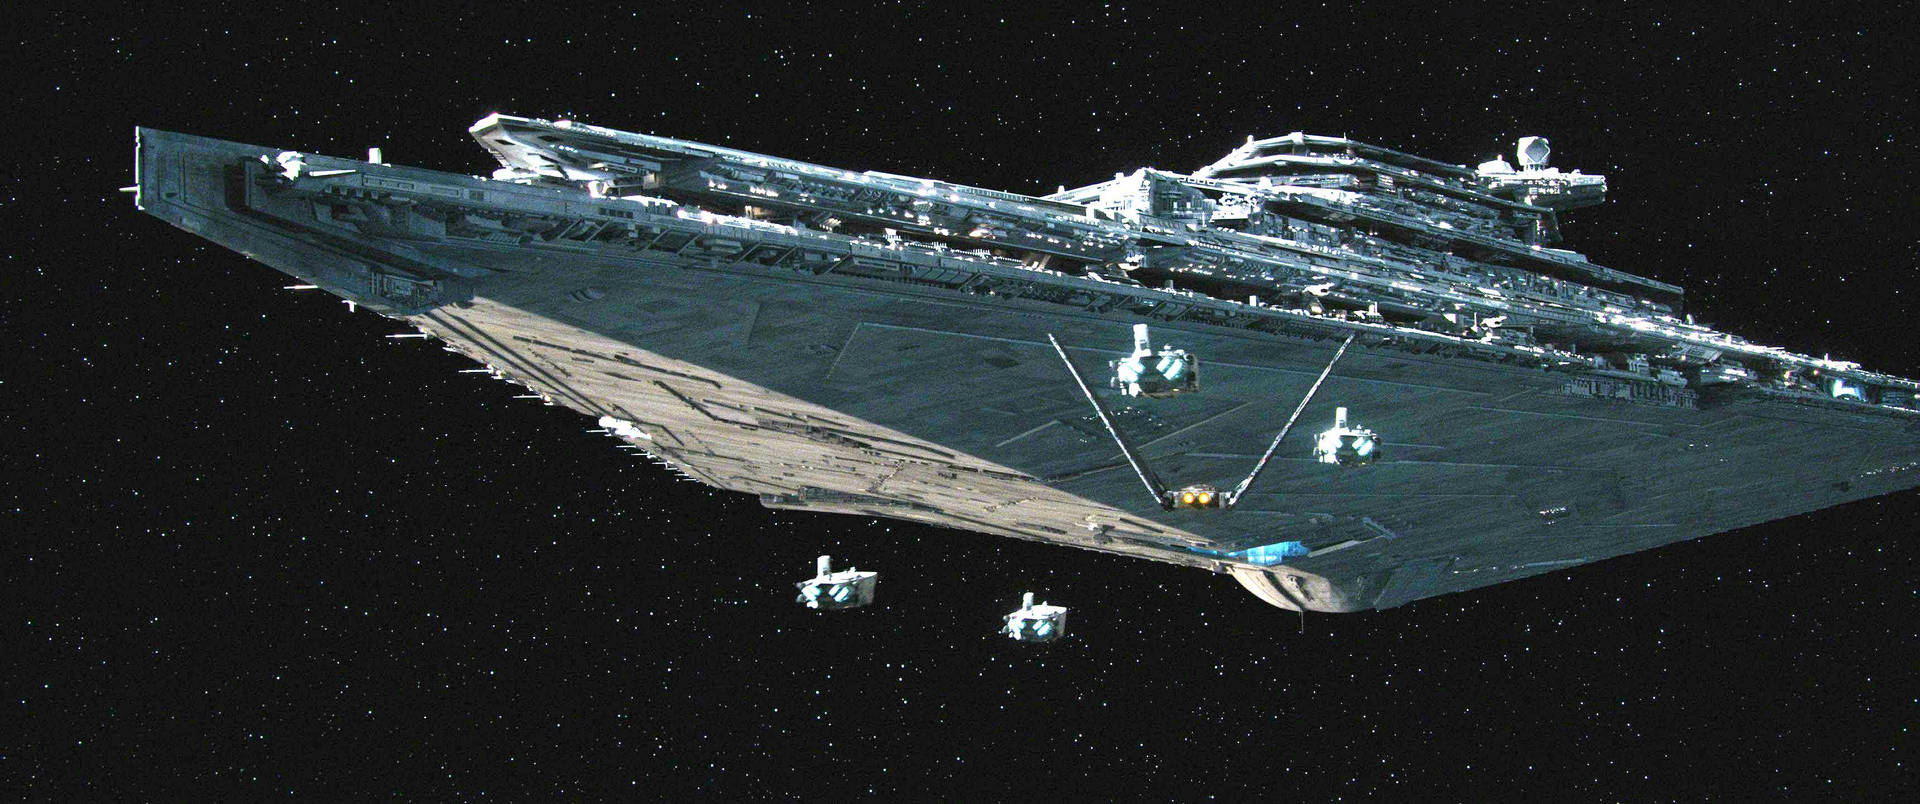 Imperial Star Destroyer From Star Wars Looms In Space Background